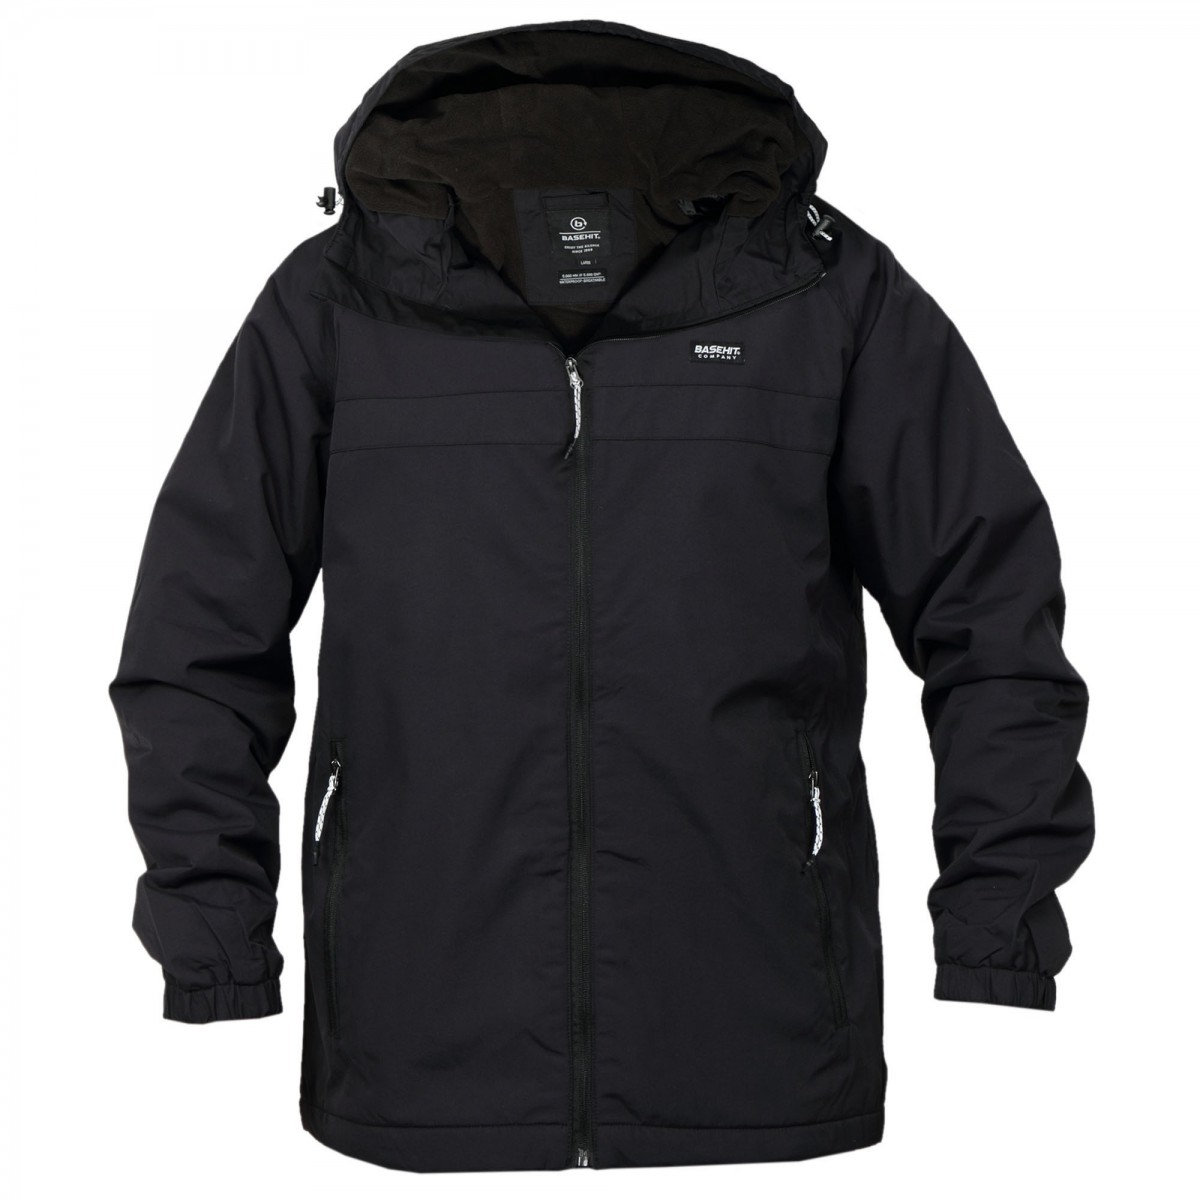 MENS JACKET WITH HOOD